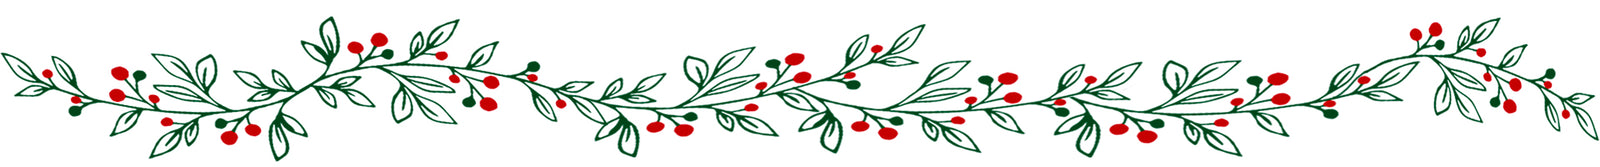 Decorative holly graphic image with holly and berries.